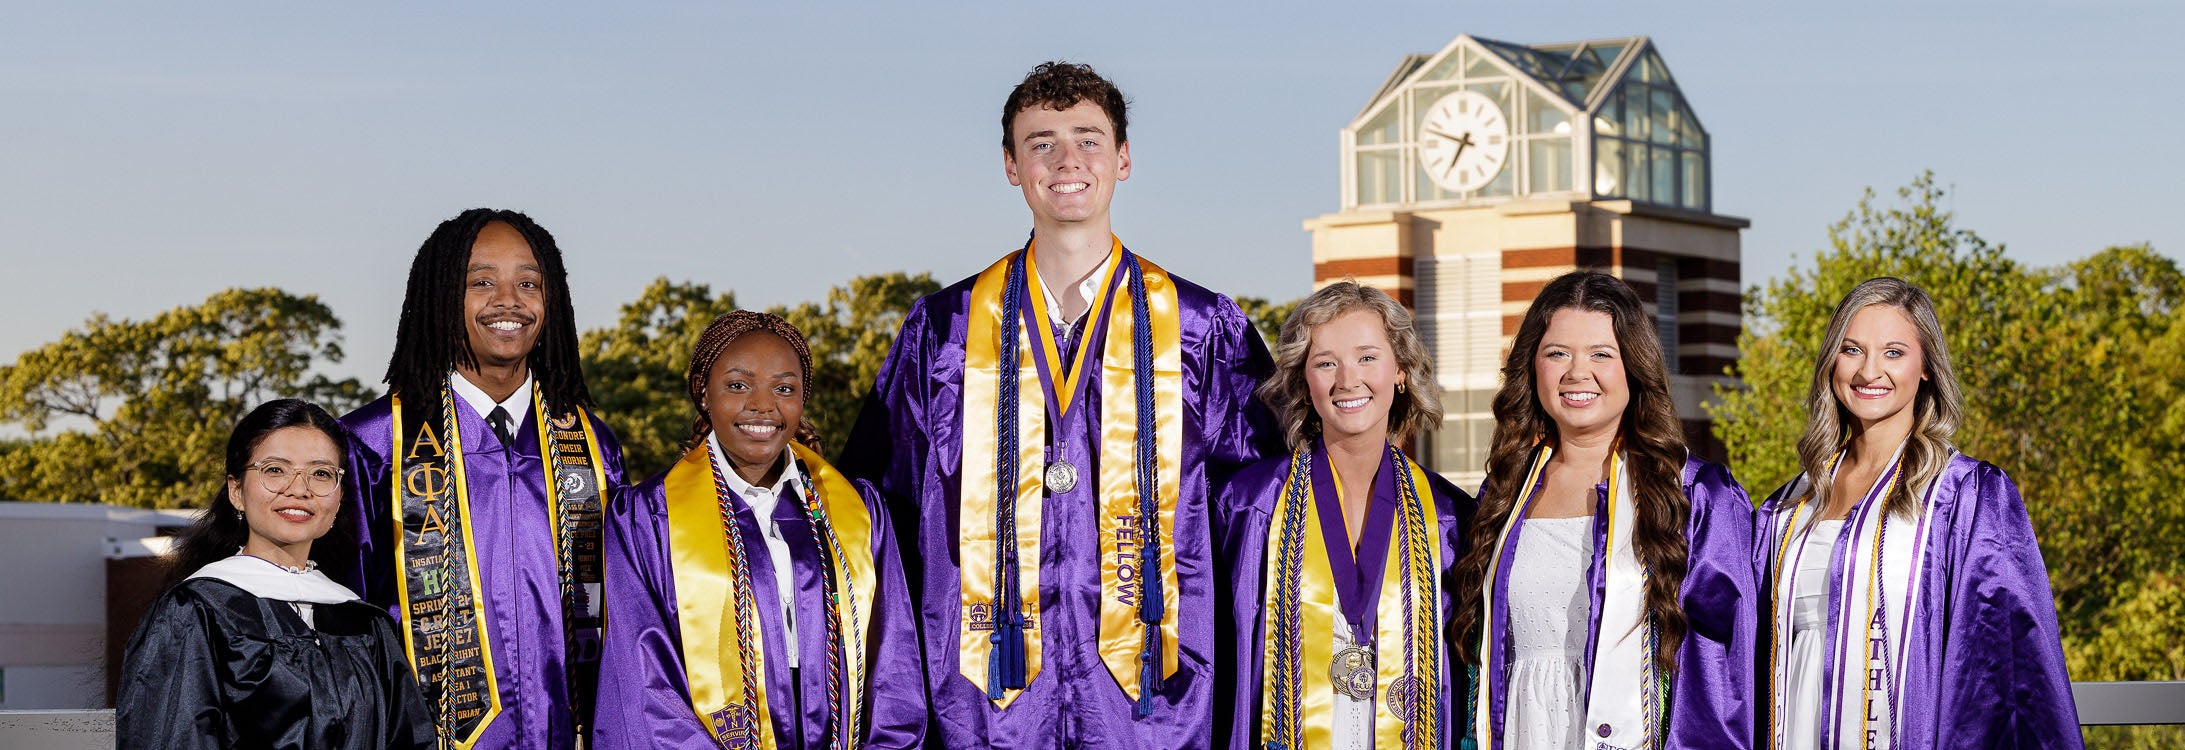 Seven upcoming ECU graduates pose in front of the bell tower.